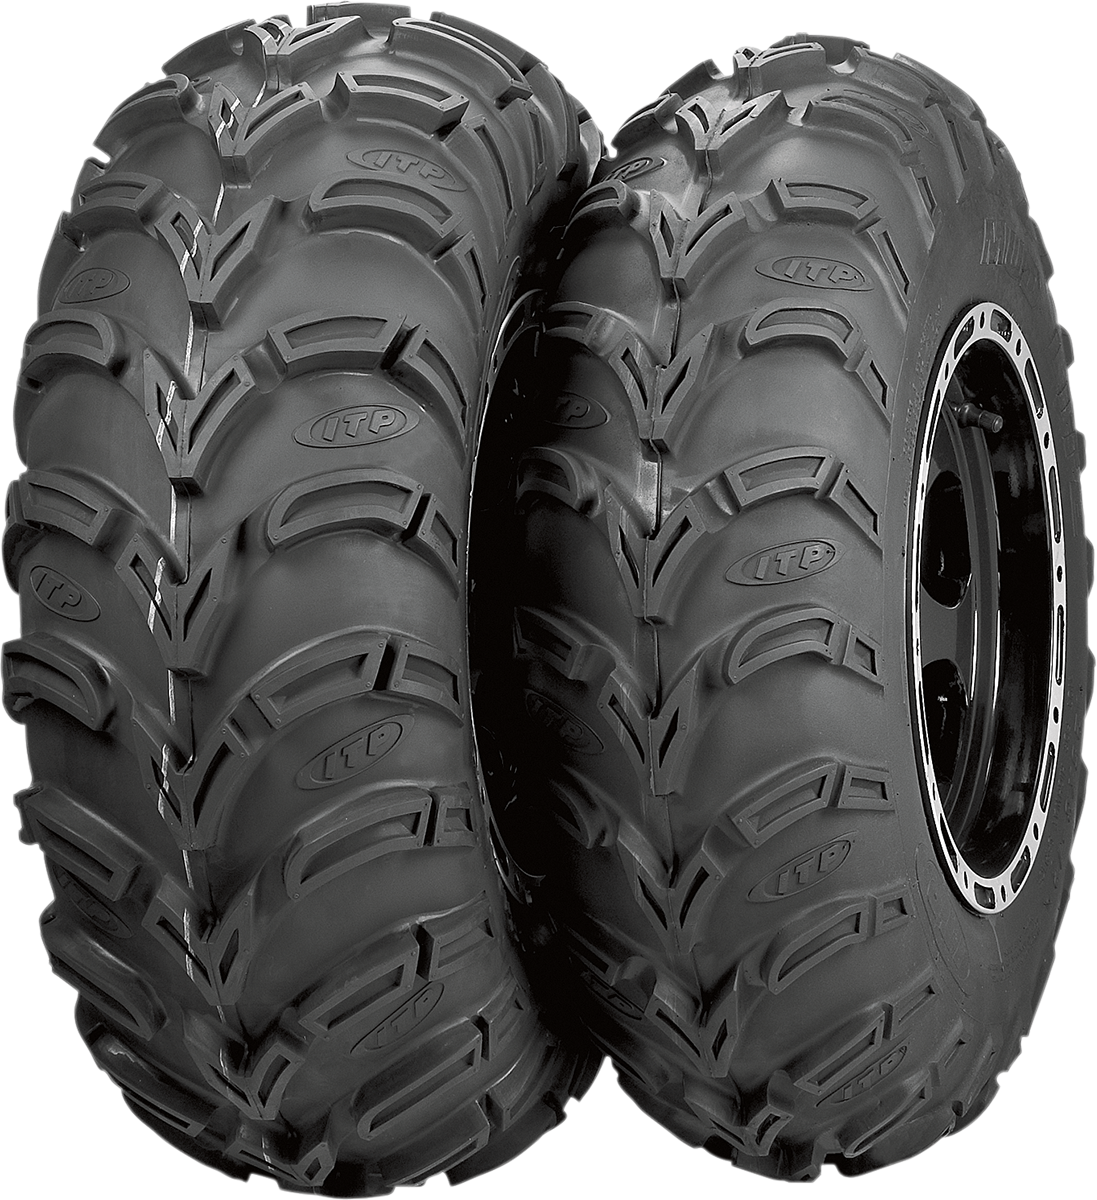 ITP Tire - Mud Lite AT - Front/Rear - 25x11-10 - 6 Ply 56A308